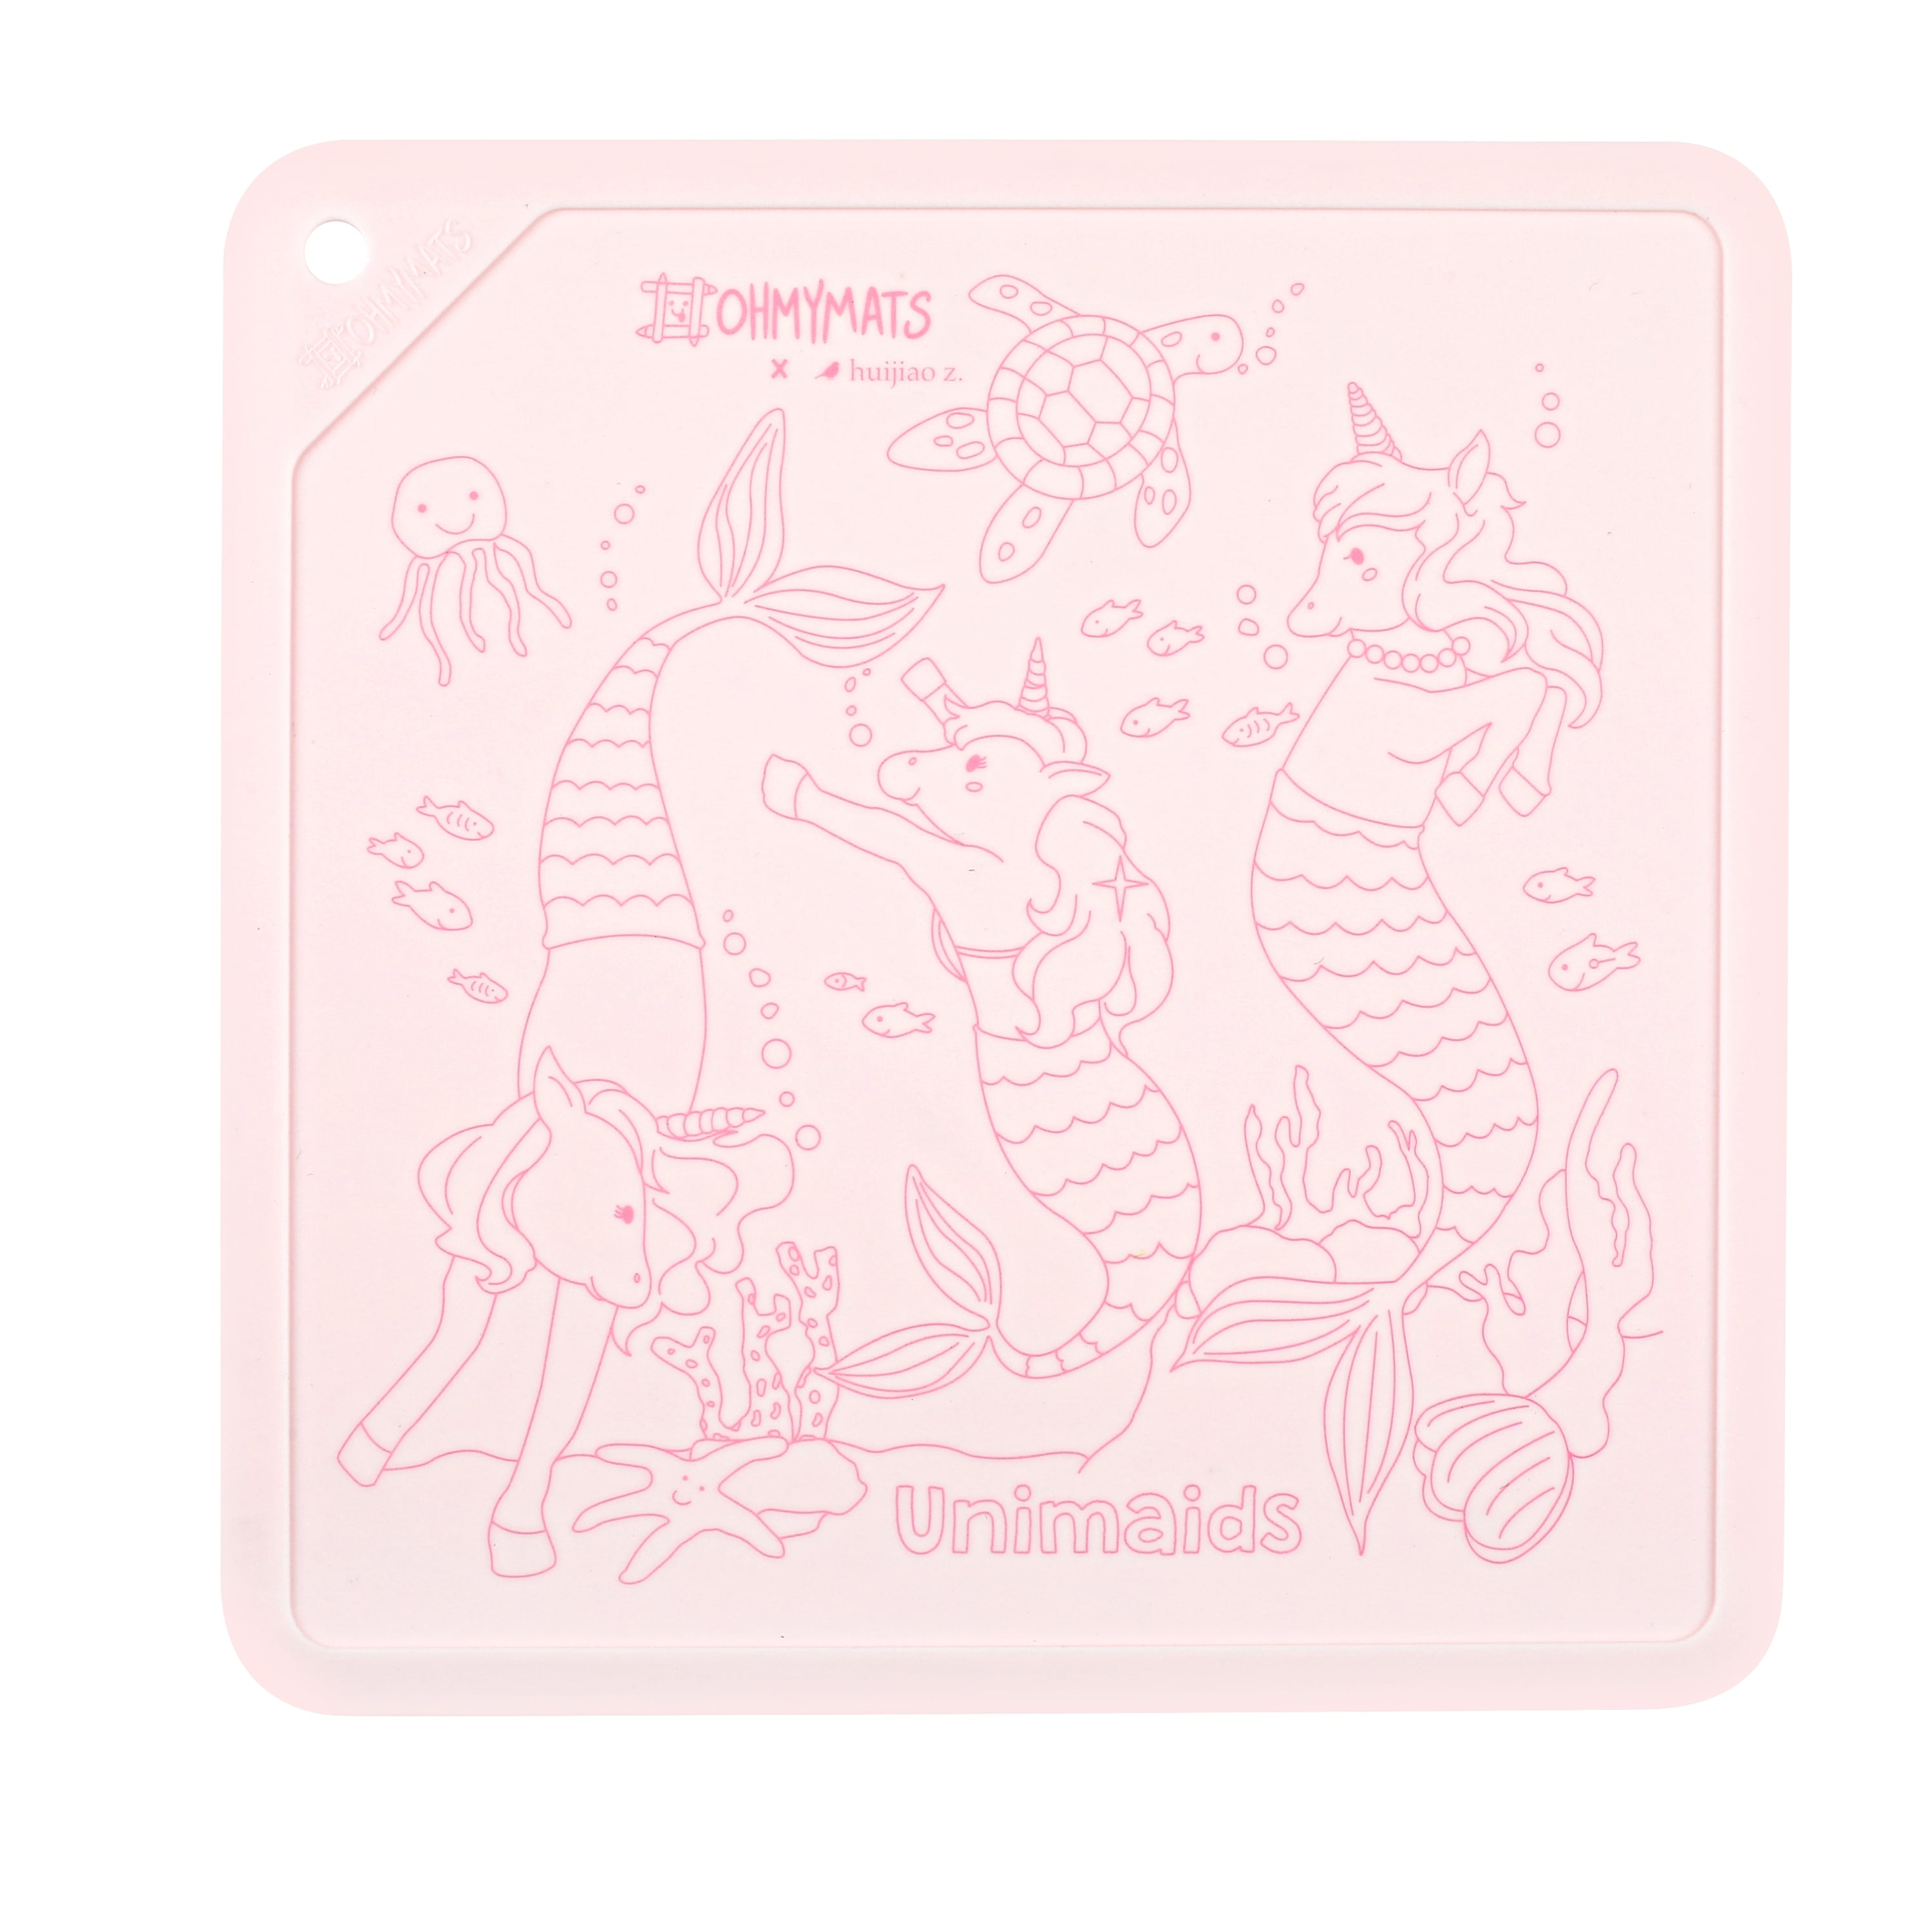 #ohmymats Square Mats - The Pink Series - Unimaids